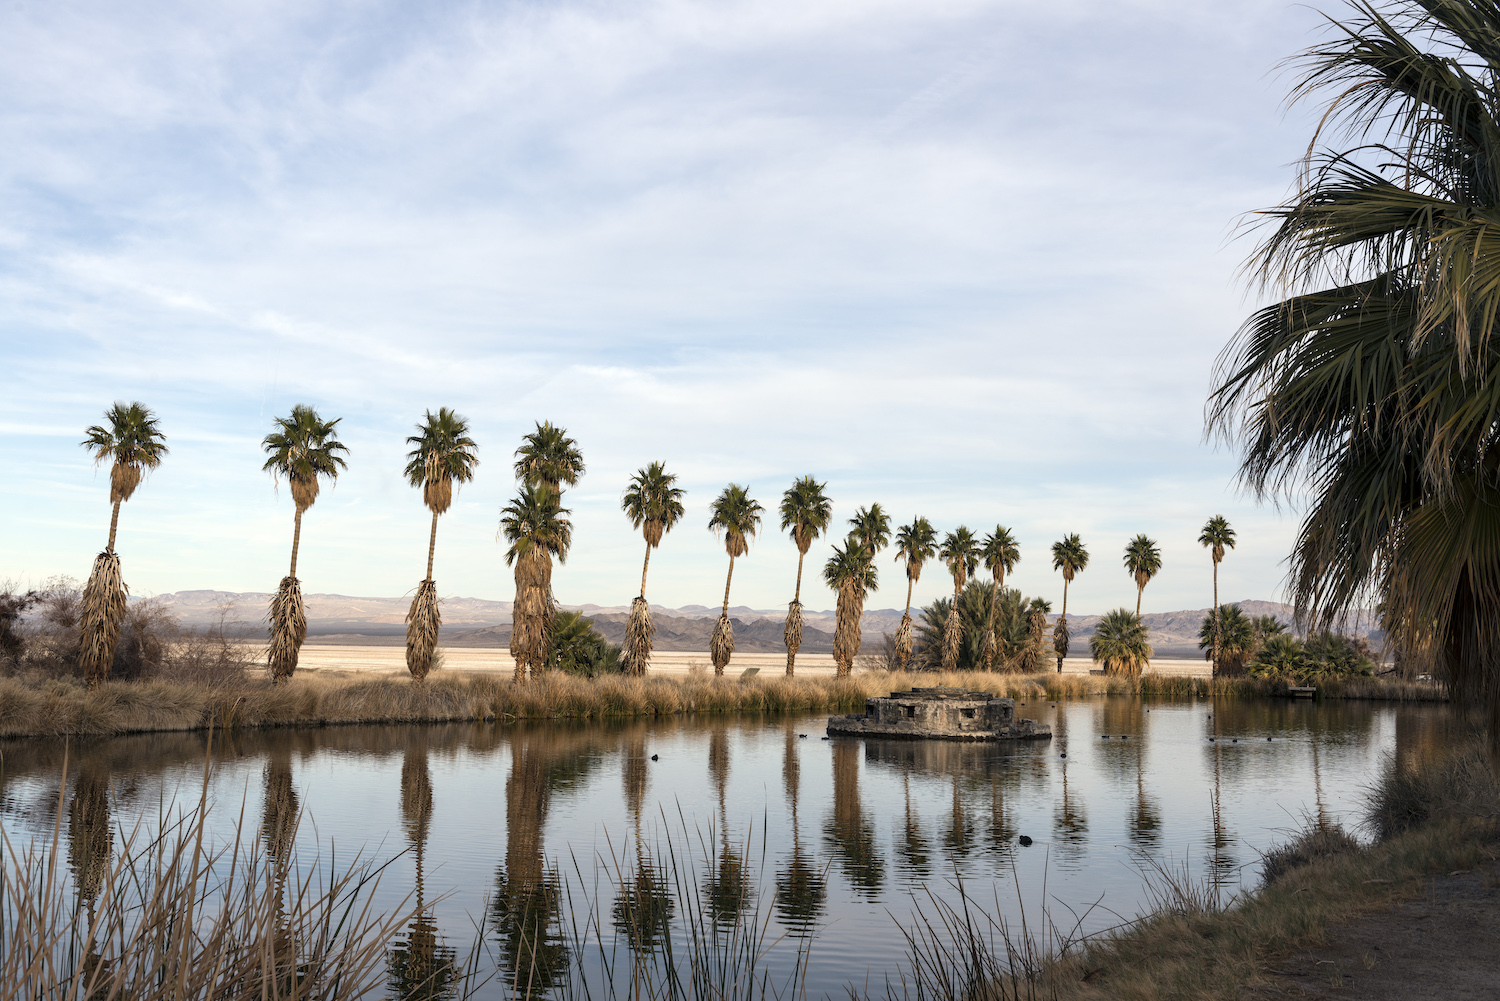 Tall palms surrounding an artificial pond called Lake Tuendae at the Desert Studies Center at the tiny settlement of Zzyzx, near Baker and adjacent to the Mojave National Preserve in southeast California